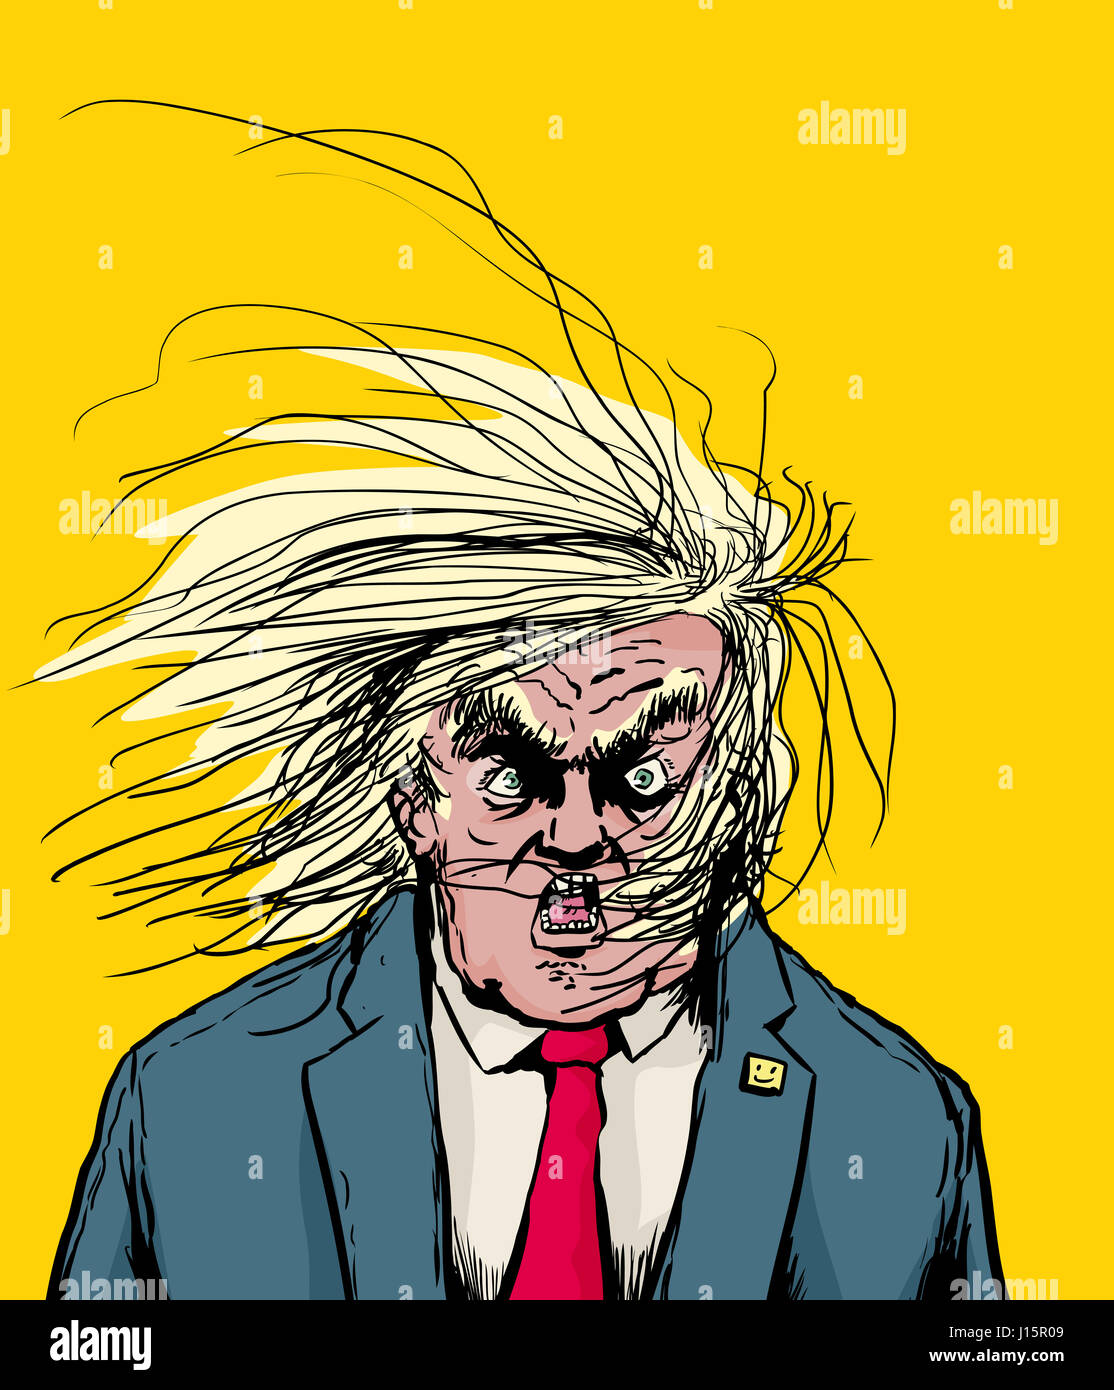 April 18, 2017. Caricature of angry Donald Trump with hair blowing in his face Stock Photo